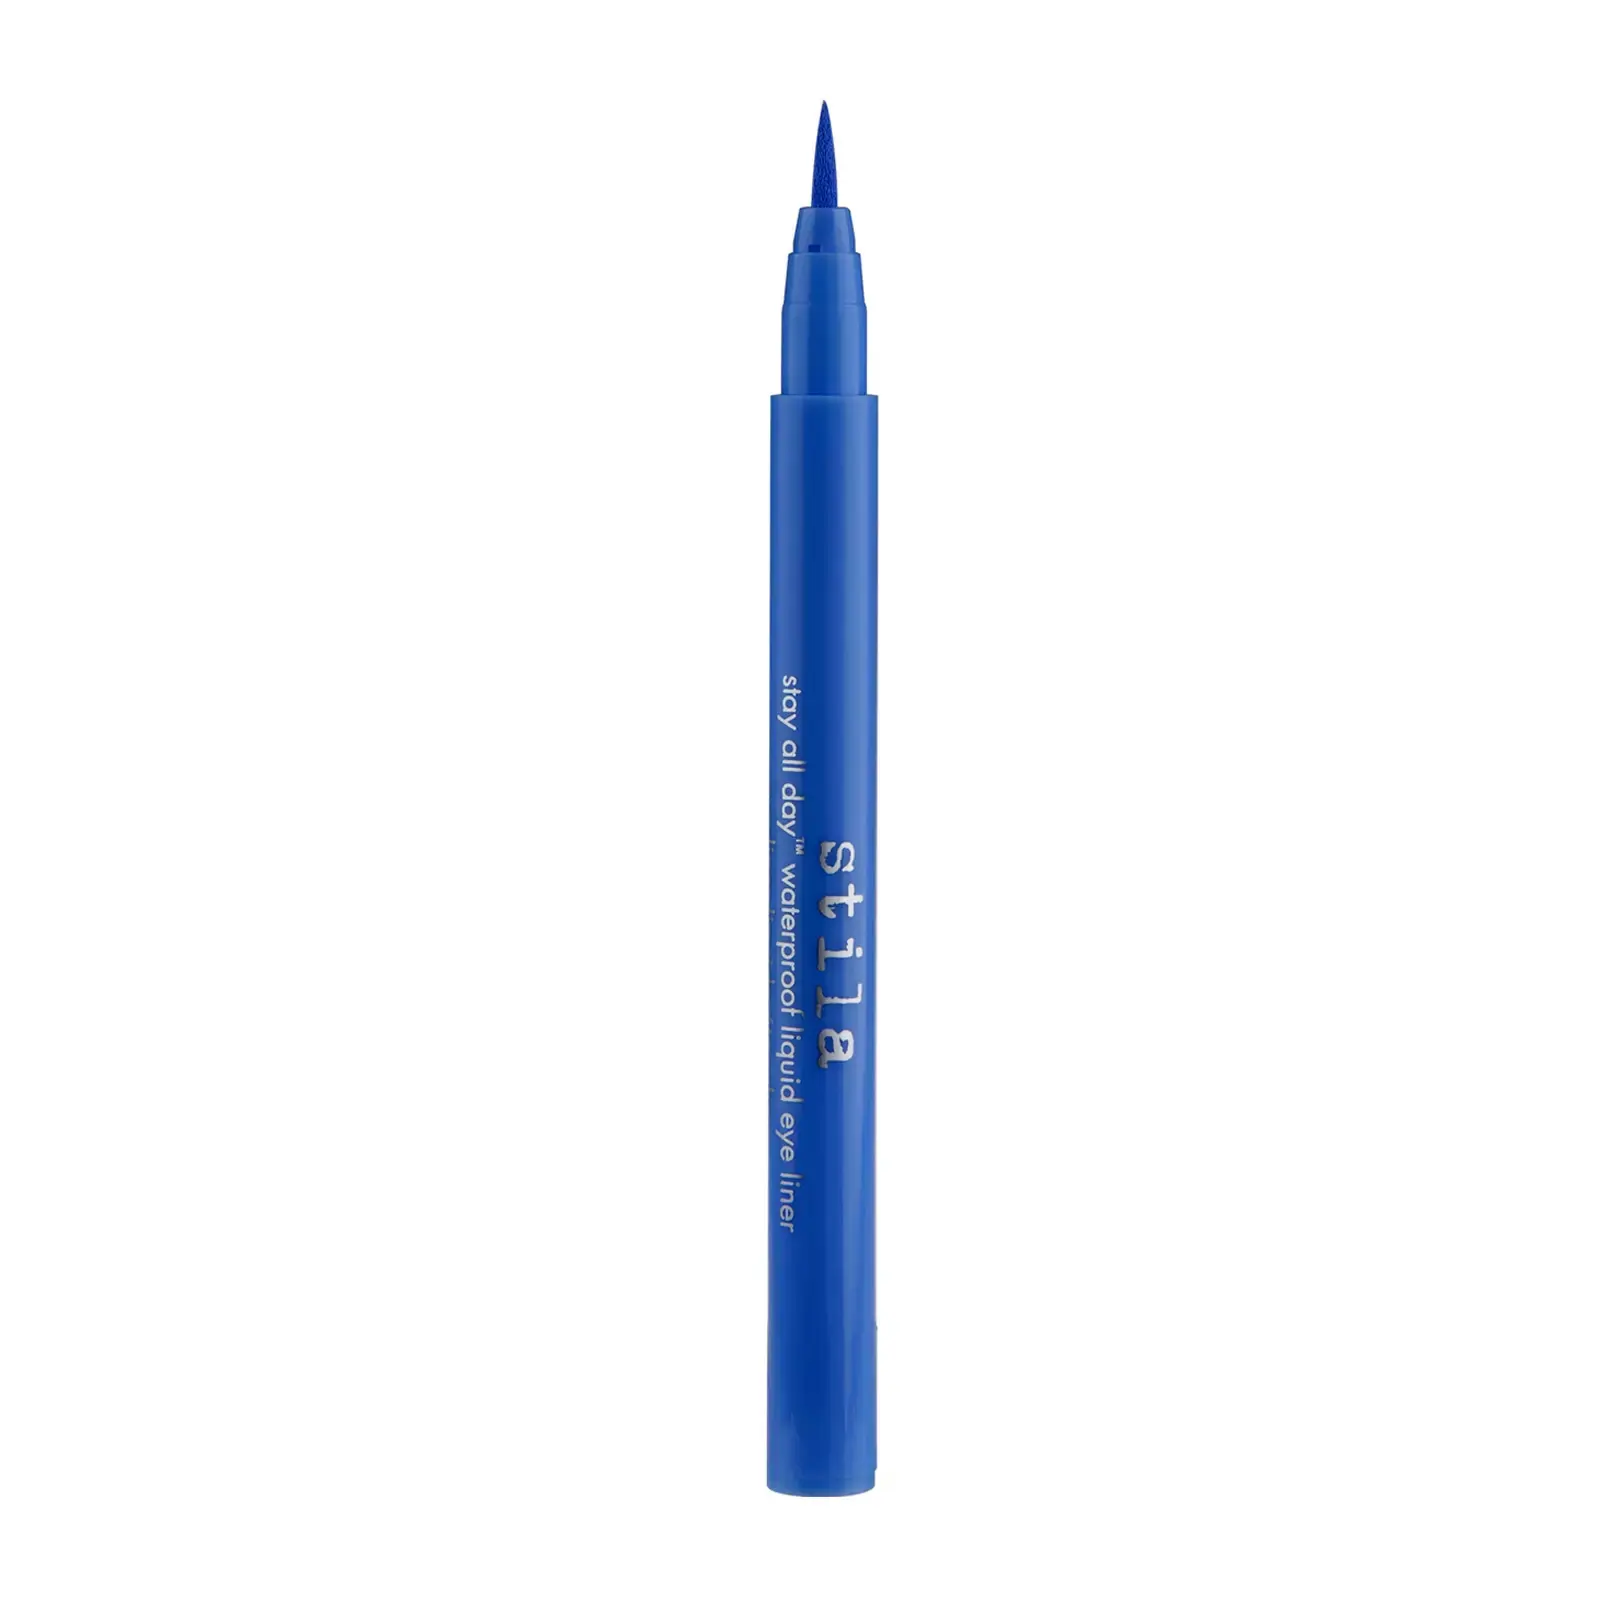 Stila Stay All Day Waterproof Liquid Eye Liner 0.4g Discounts and Cashback